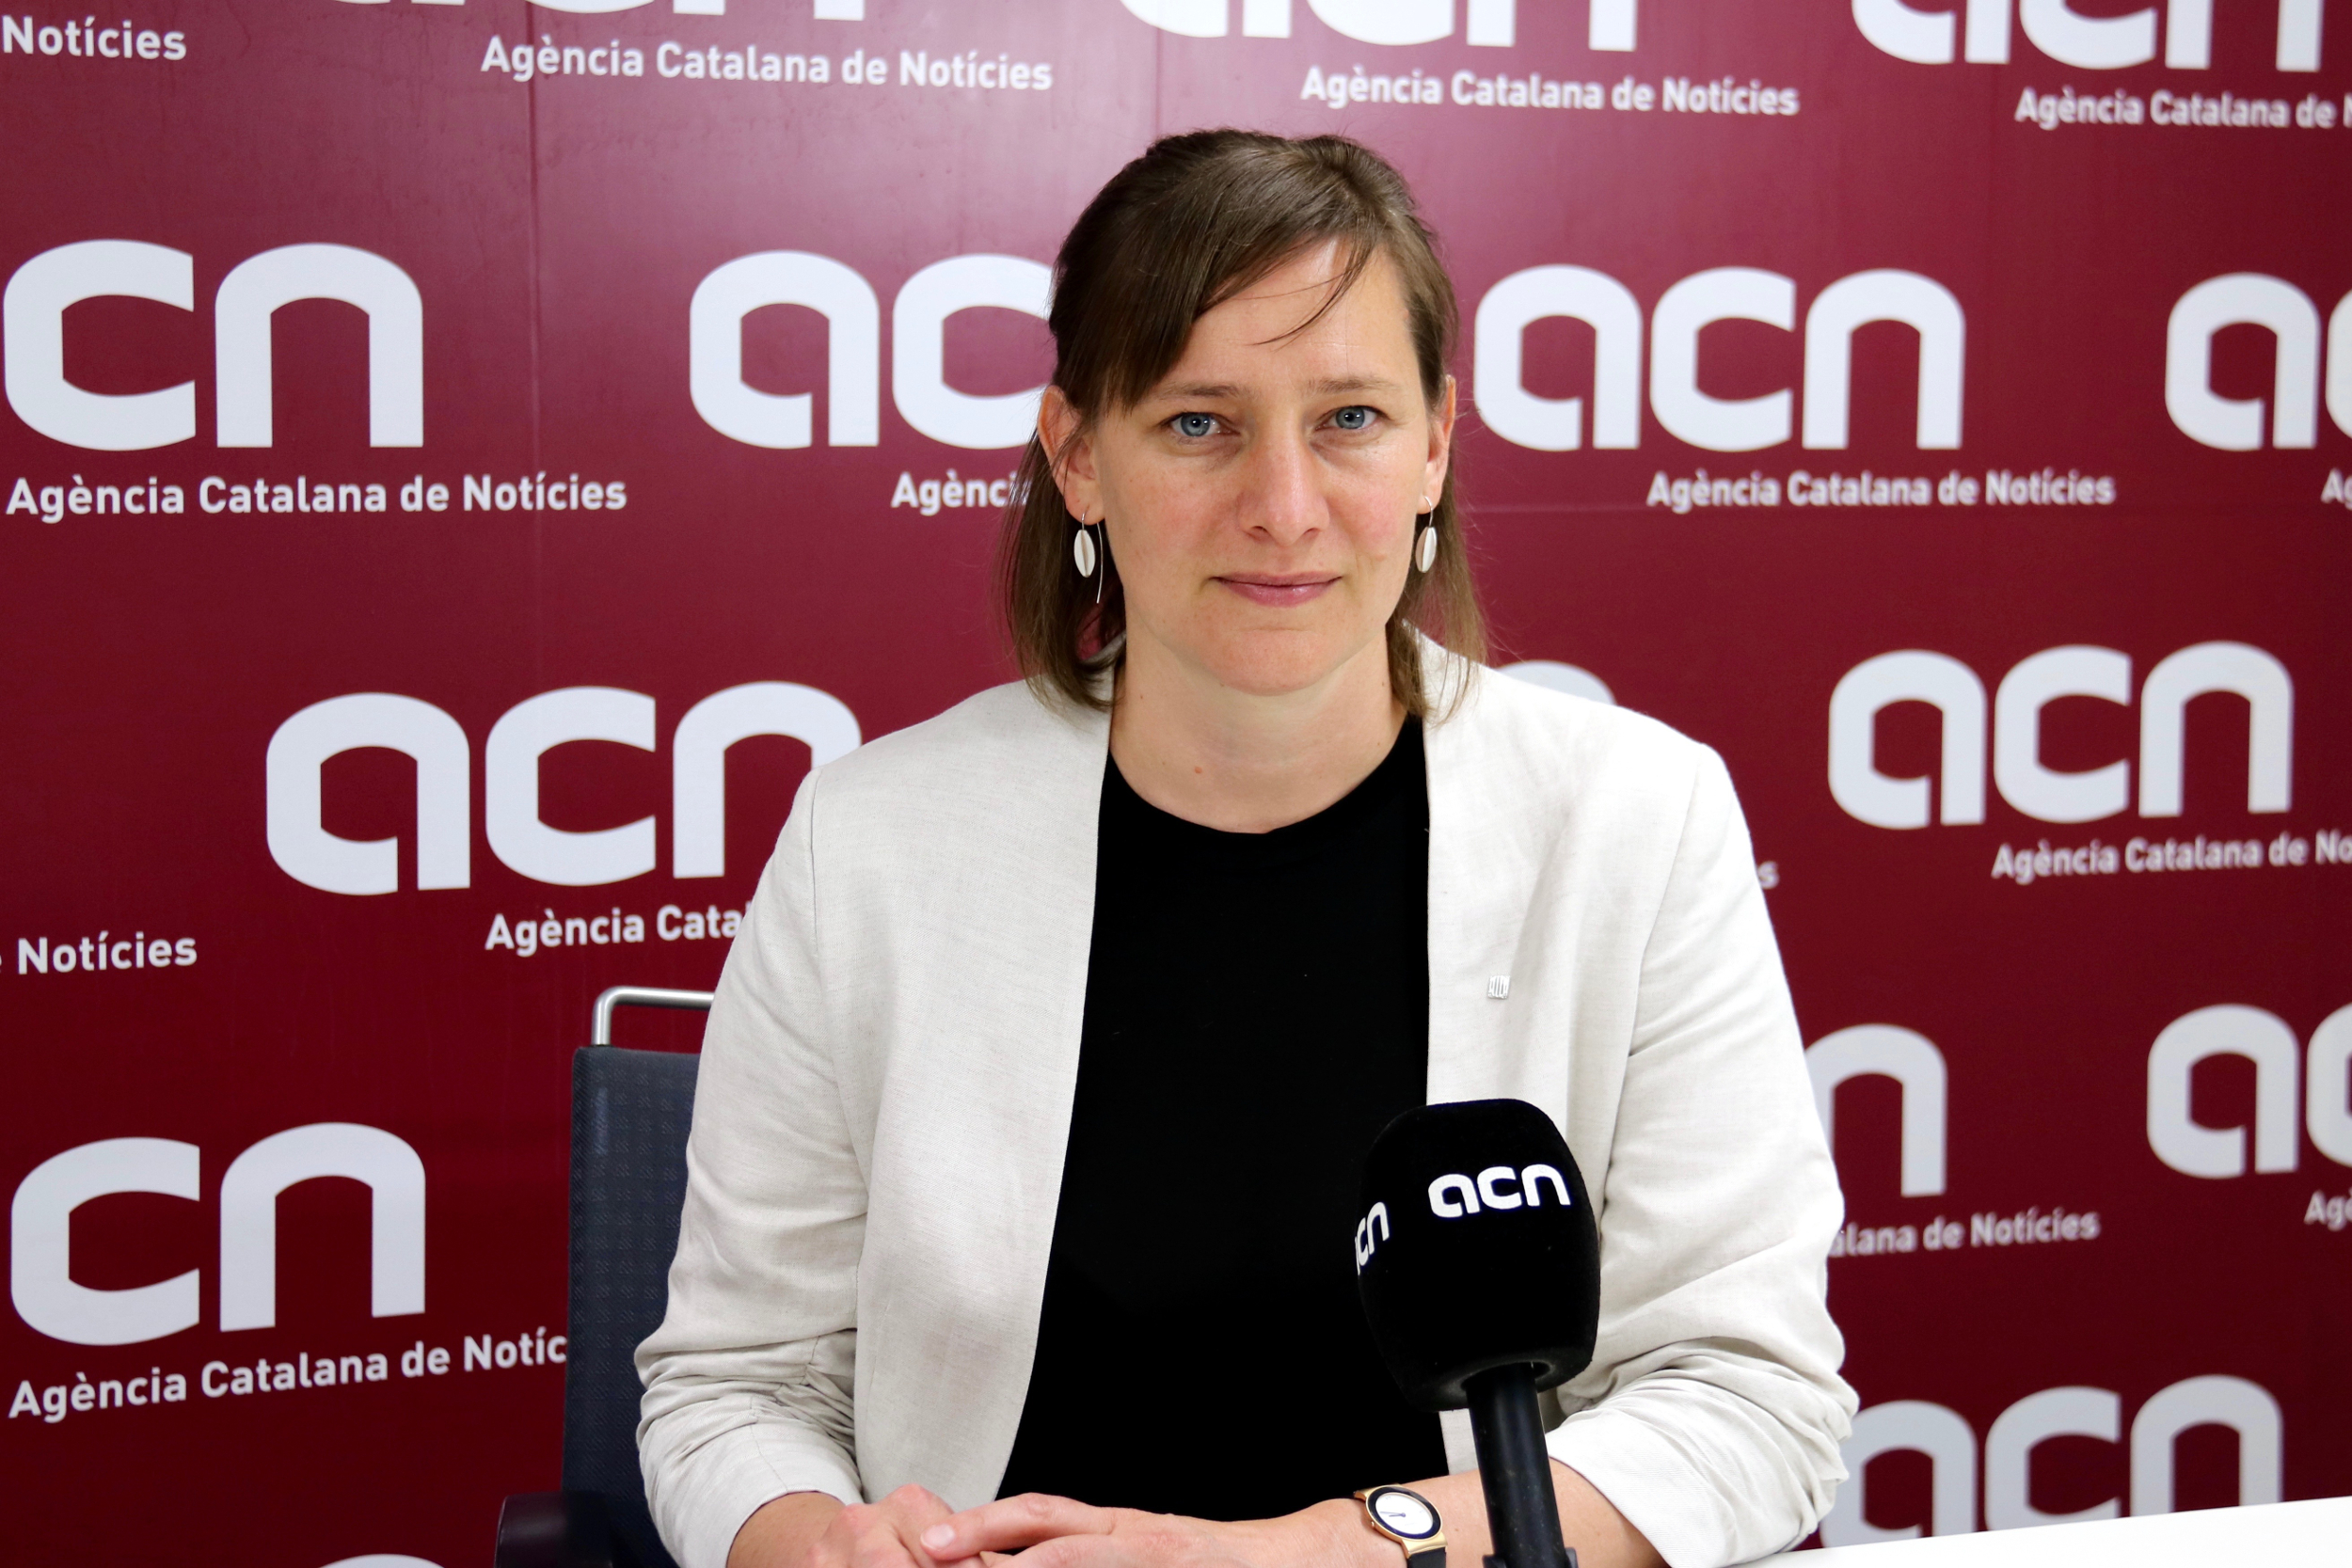 Marie Kapretz at the ACN during her interview in June 2019 (by Helle Kettner)